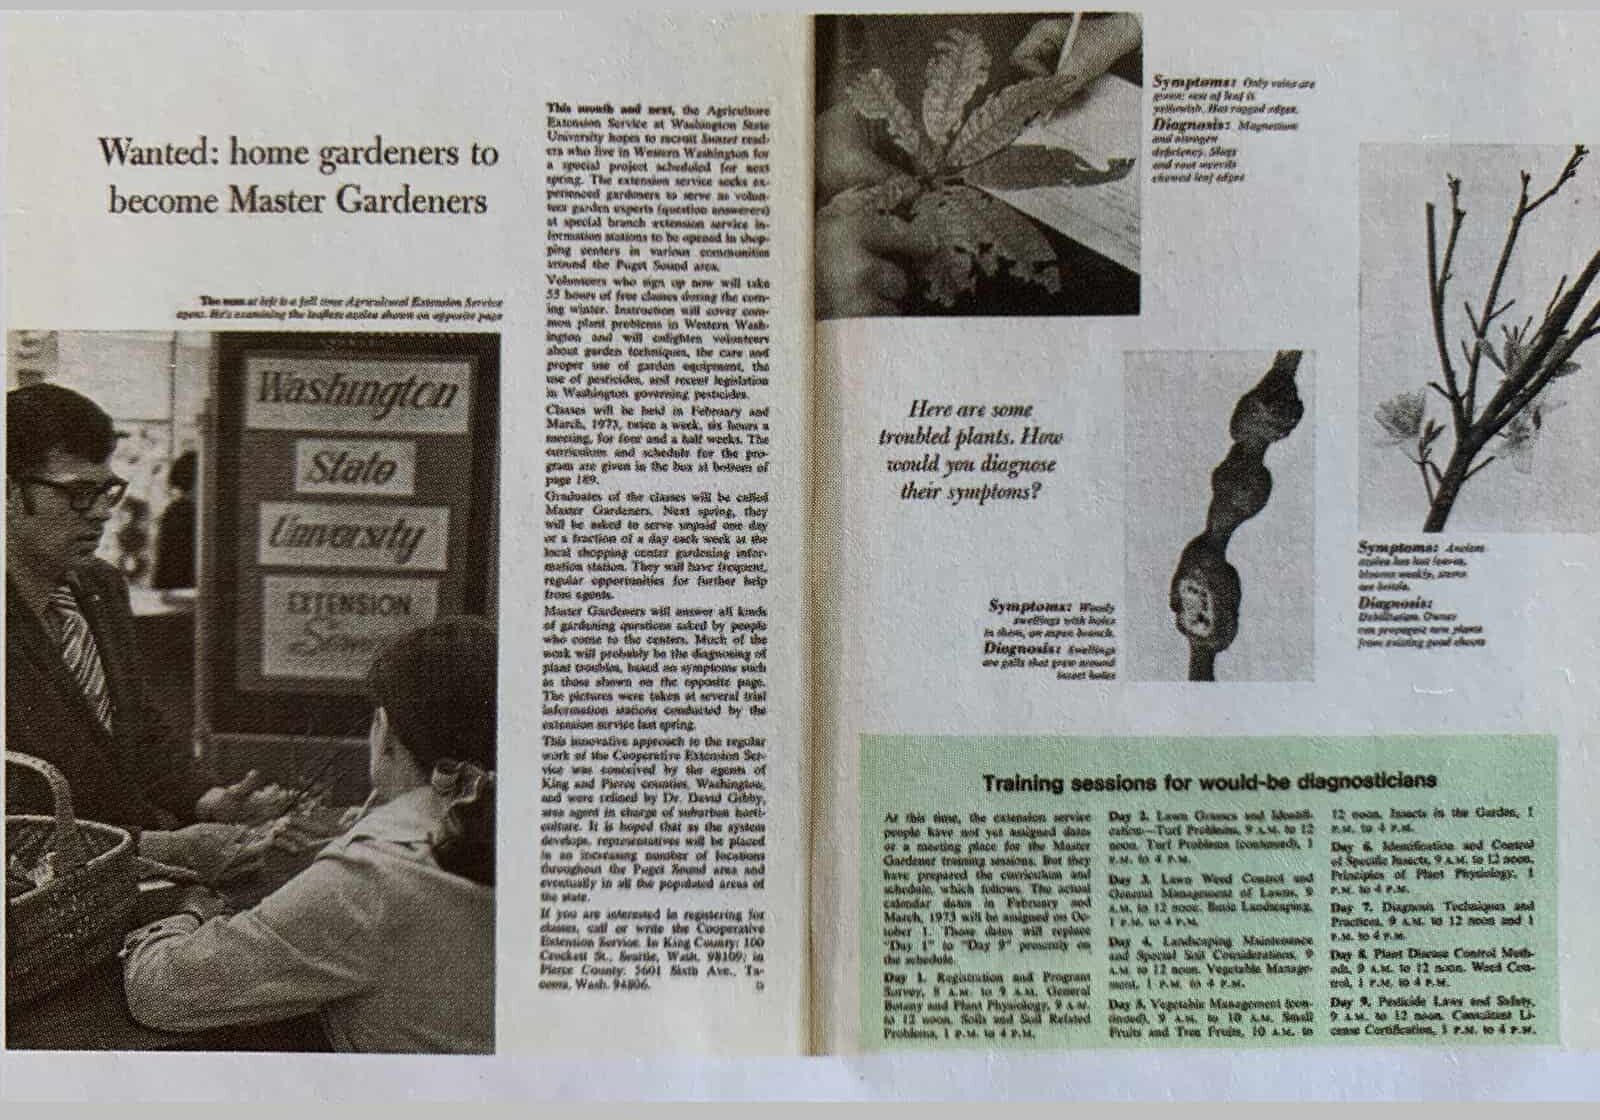 Sunset Magazine (1972) ran an article recruiting Master Gardeners for the WSU Extension program